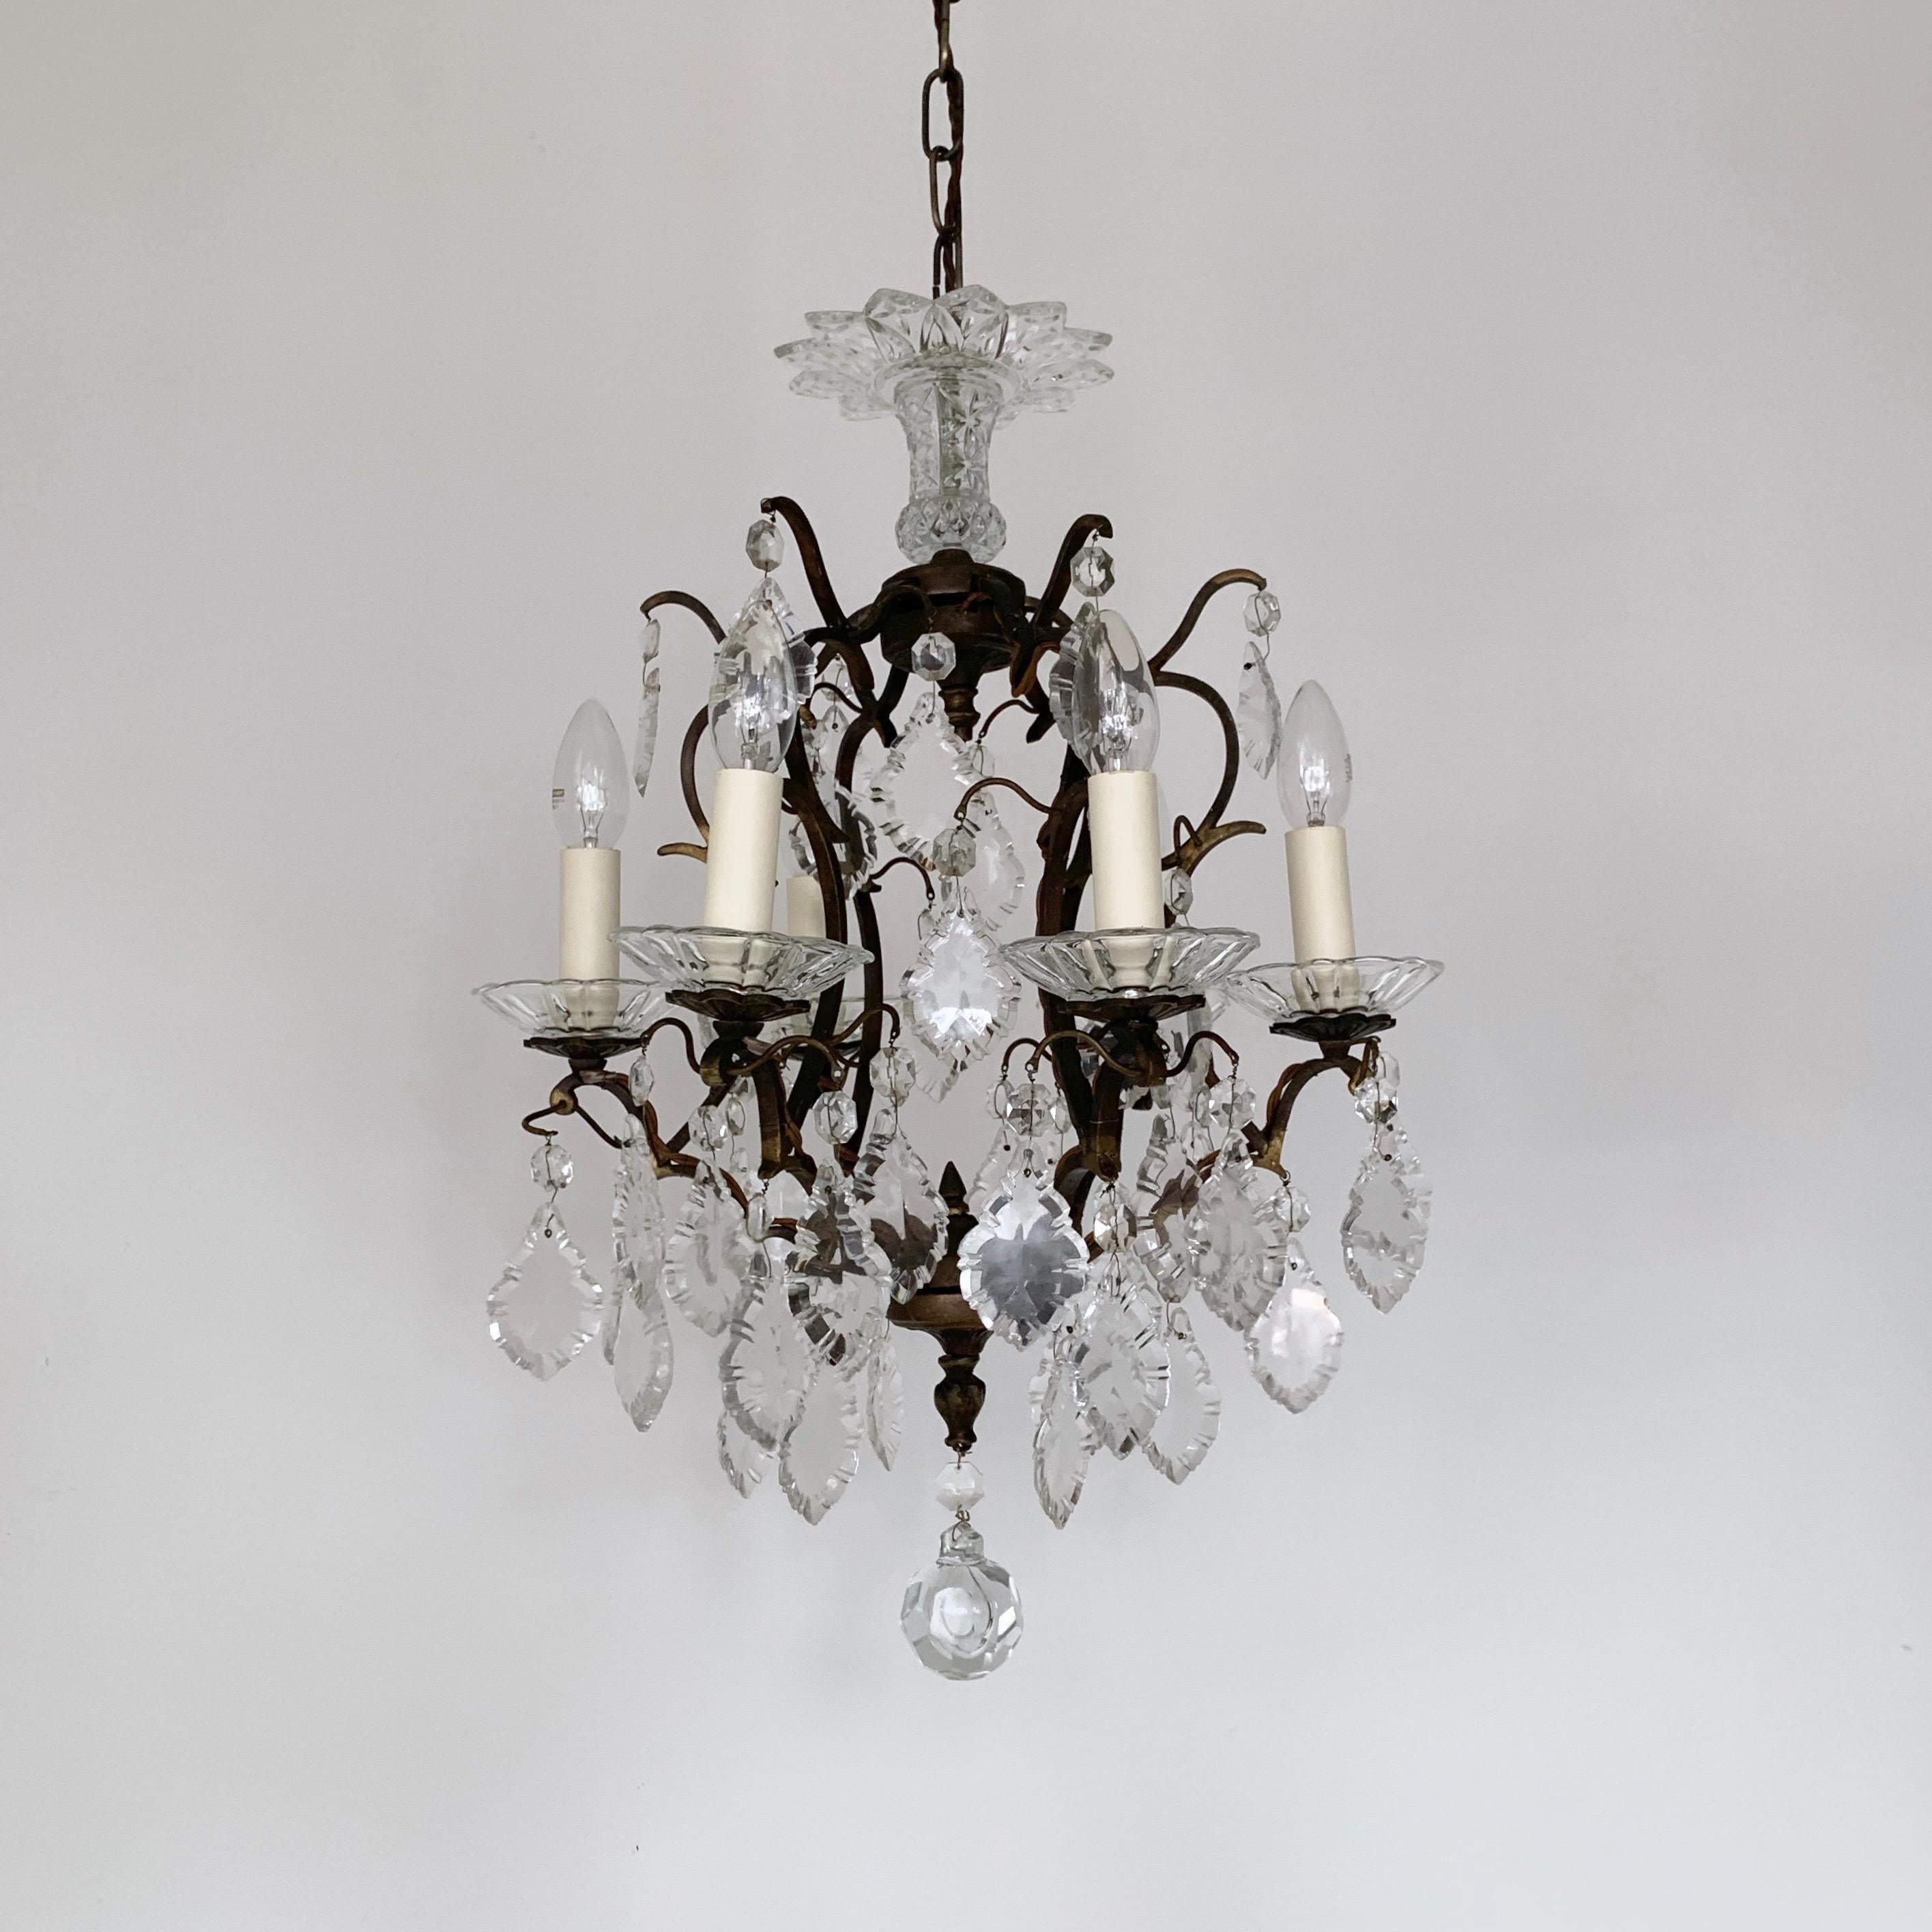 Italian Birdcage Chandelier with Glass Details In Good Condition For Sale In Stockport, GB